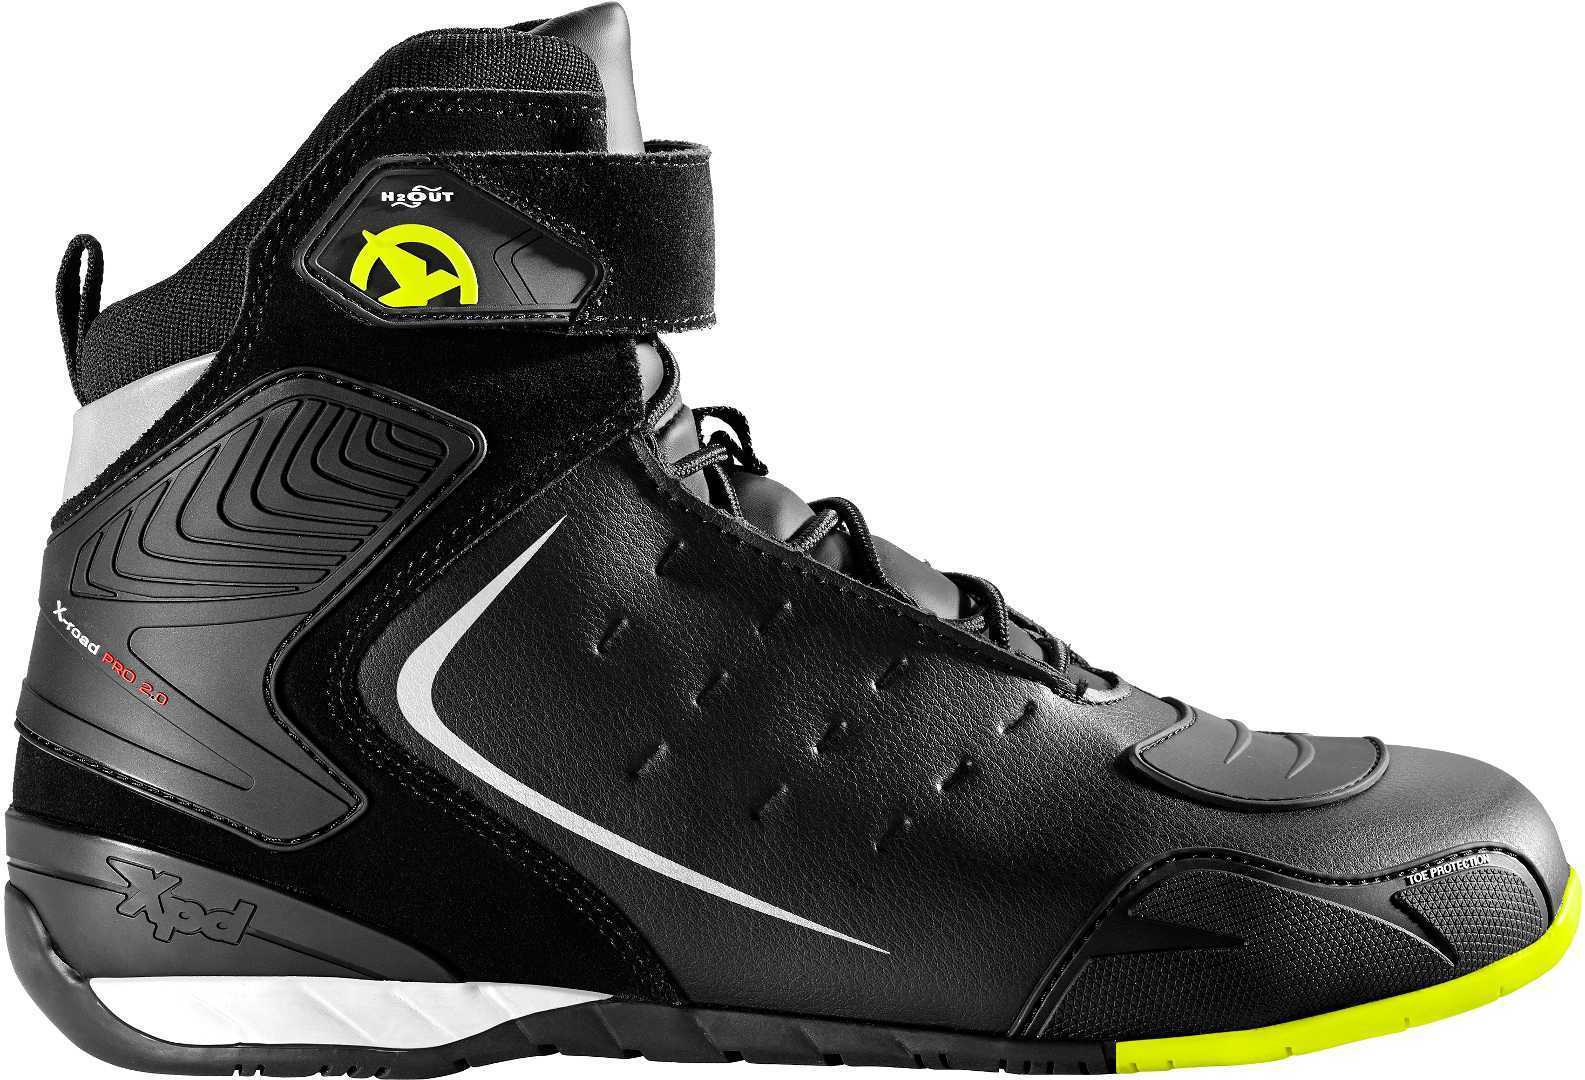 Image of XPD X-Road H2Out Yellow Fluo Size 45 ID 8030161345179